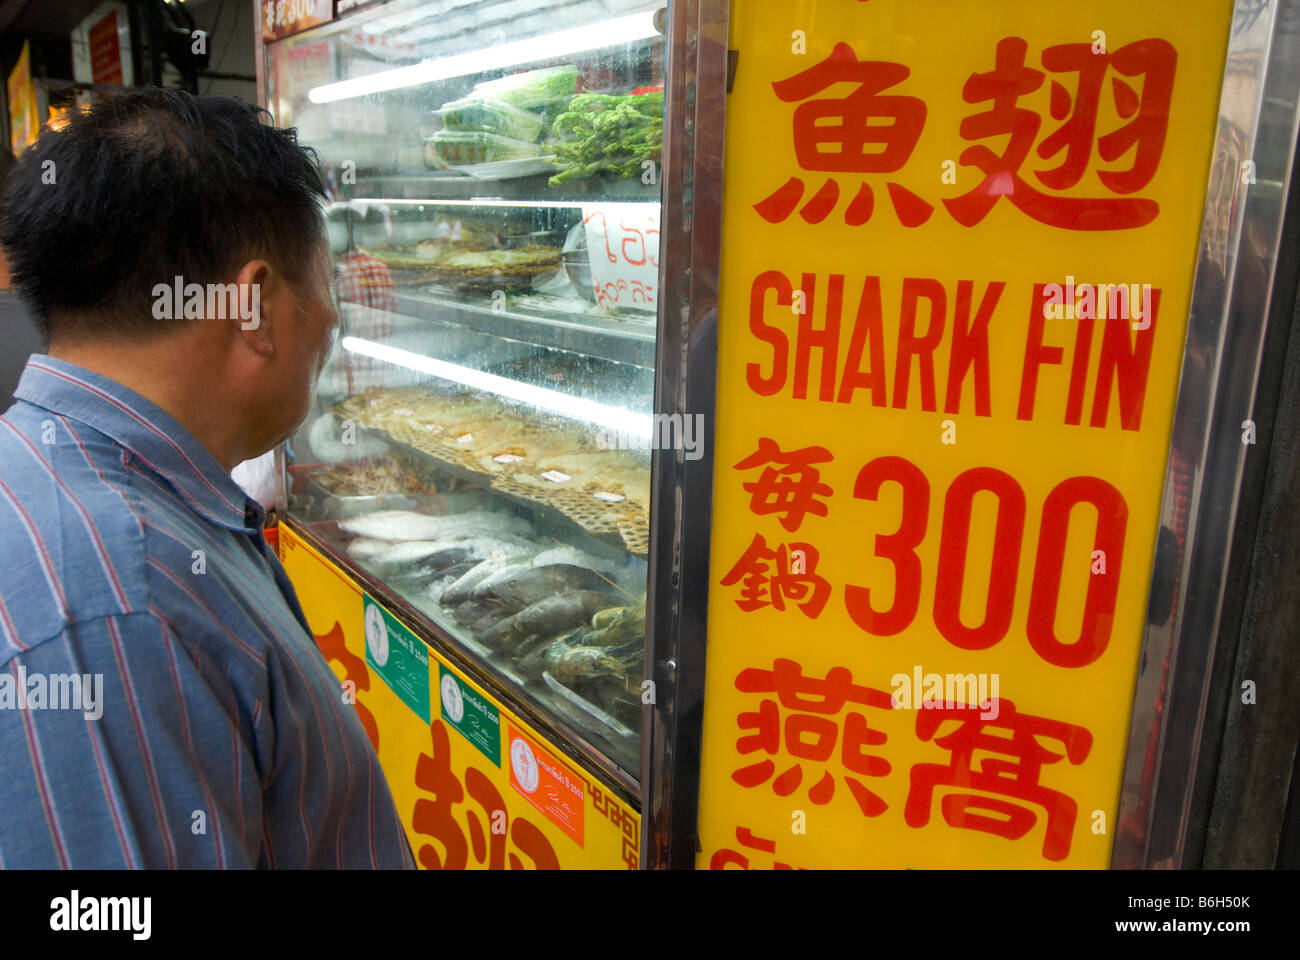 Customer looking at window display of Chinese shark fin soup restaurant in Chinatown central Bangkok Thailand Stock Photo